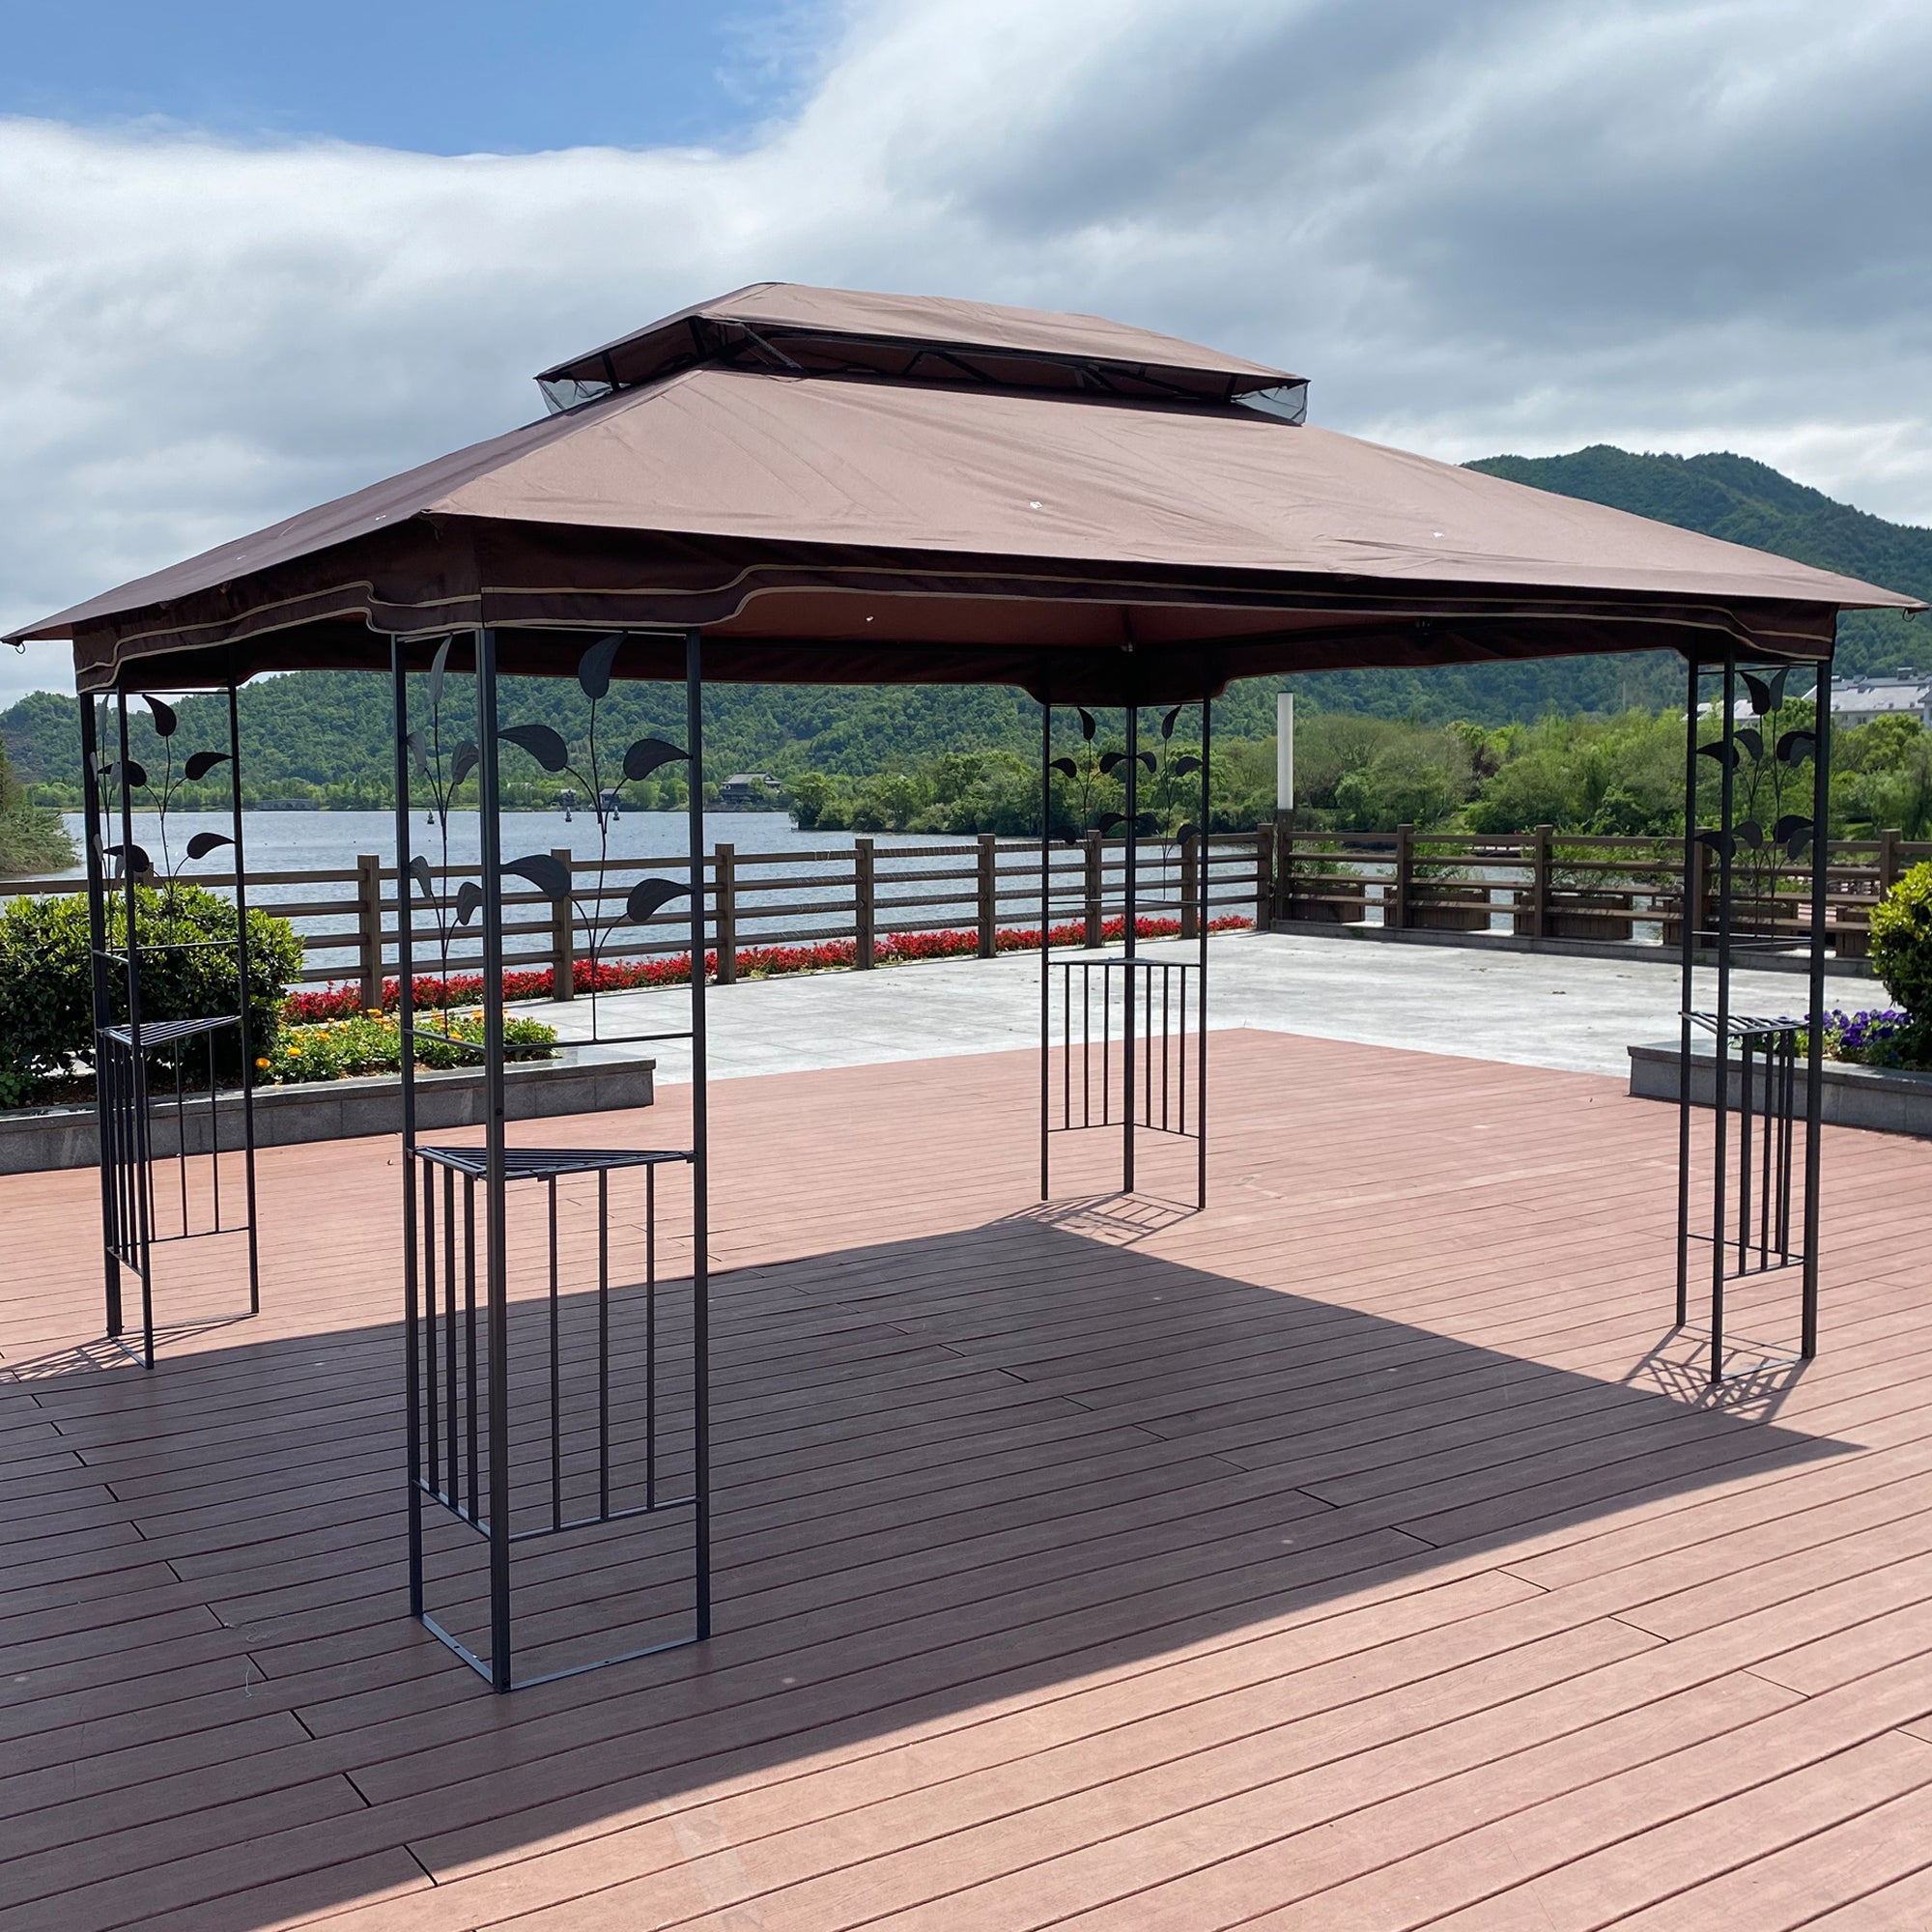 13x10 Outdoor Patio Gazebo Canopy Tent With Ventilated brown-metal